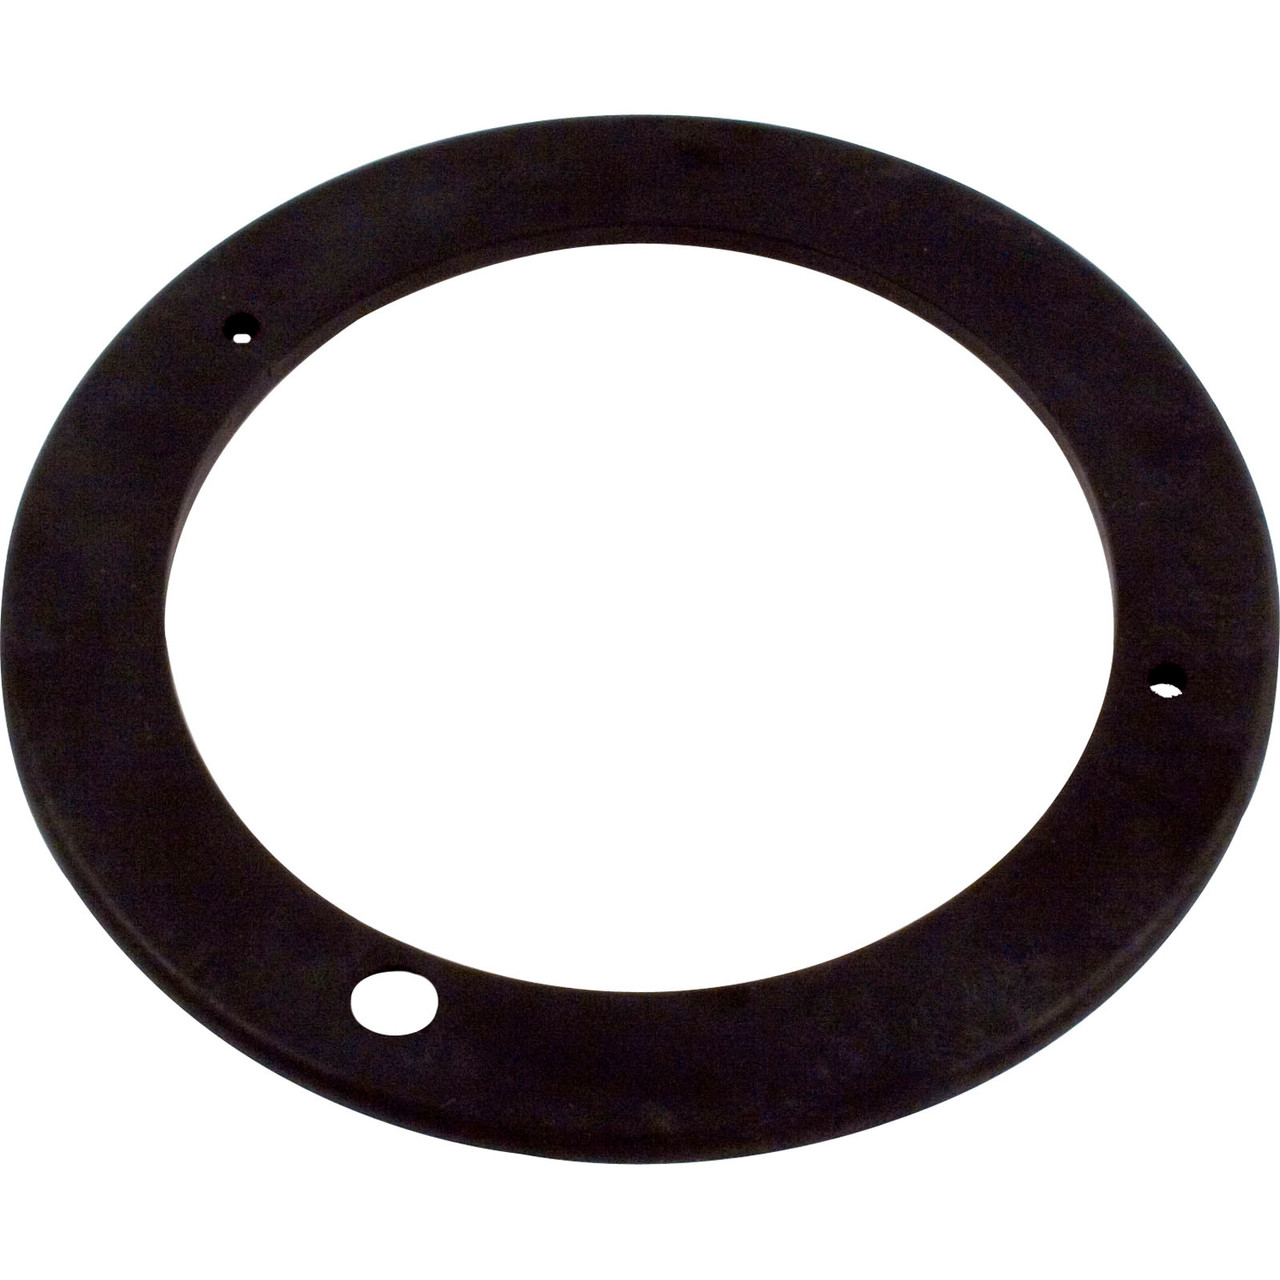 Pentair, Challenger, Mounting, Plate, 0.75, 3.0, HP, 355317, Spa, Filter, Parts, 788379658755